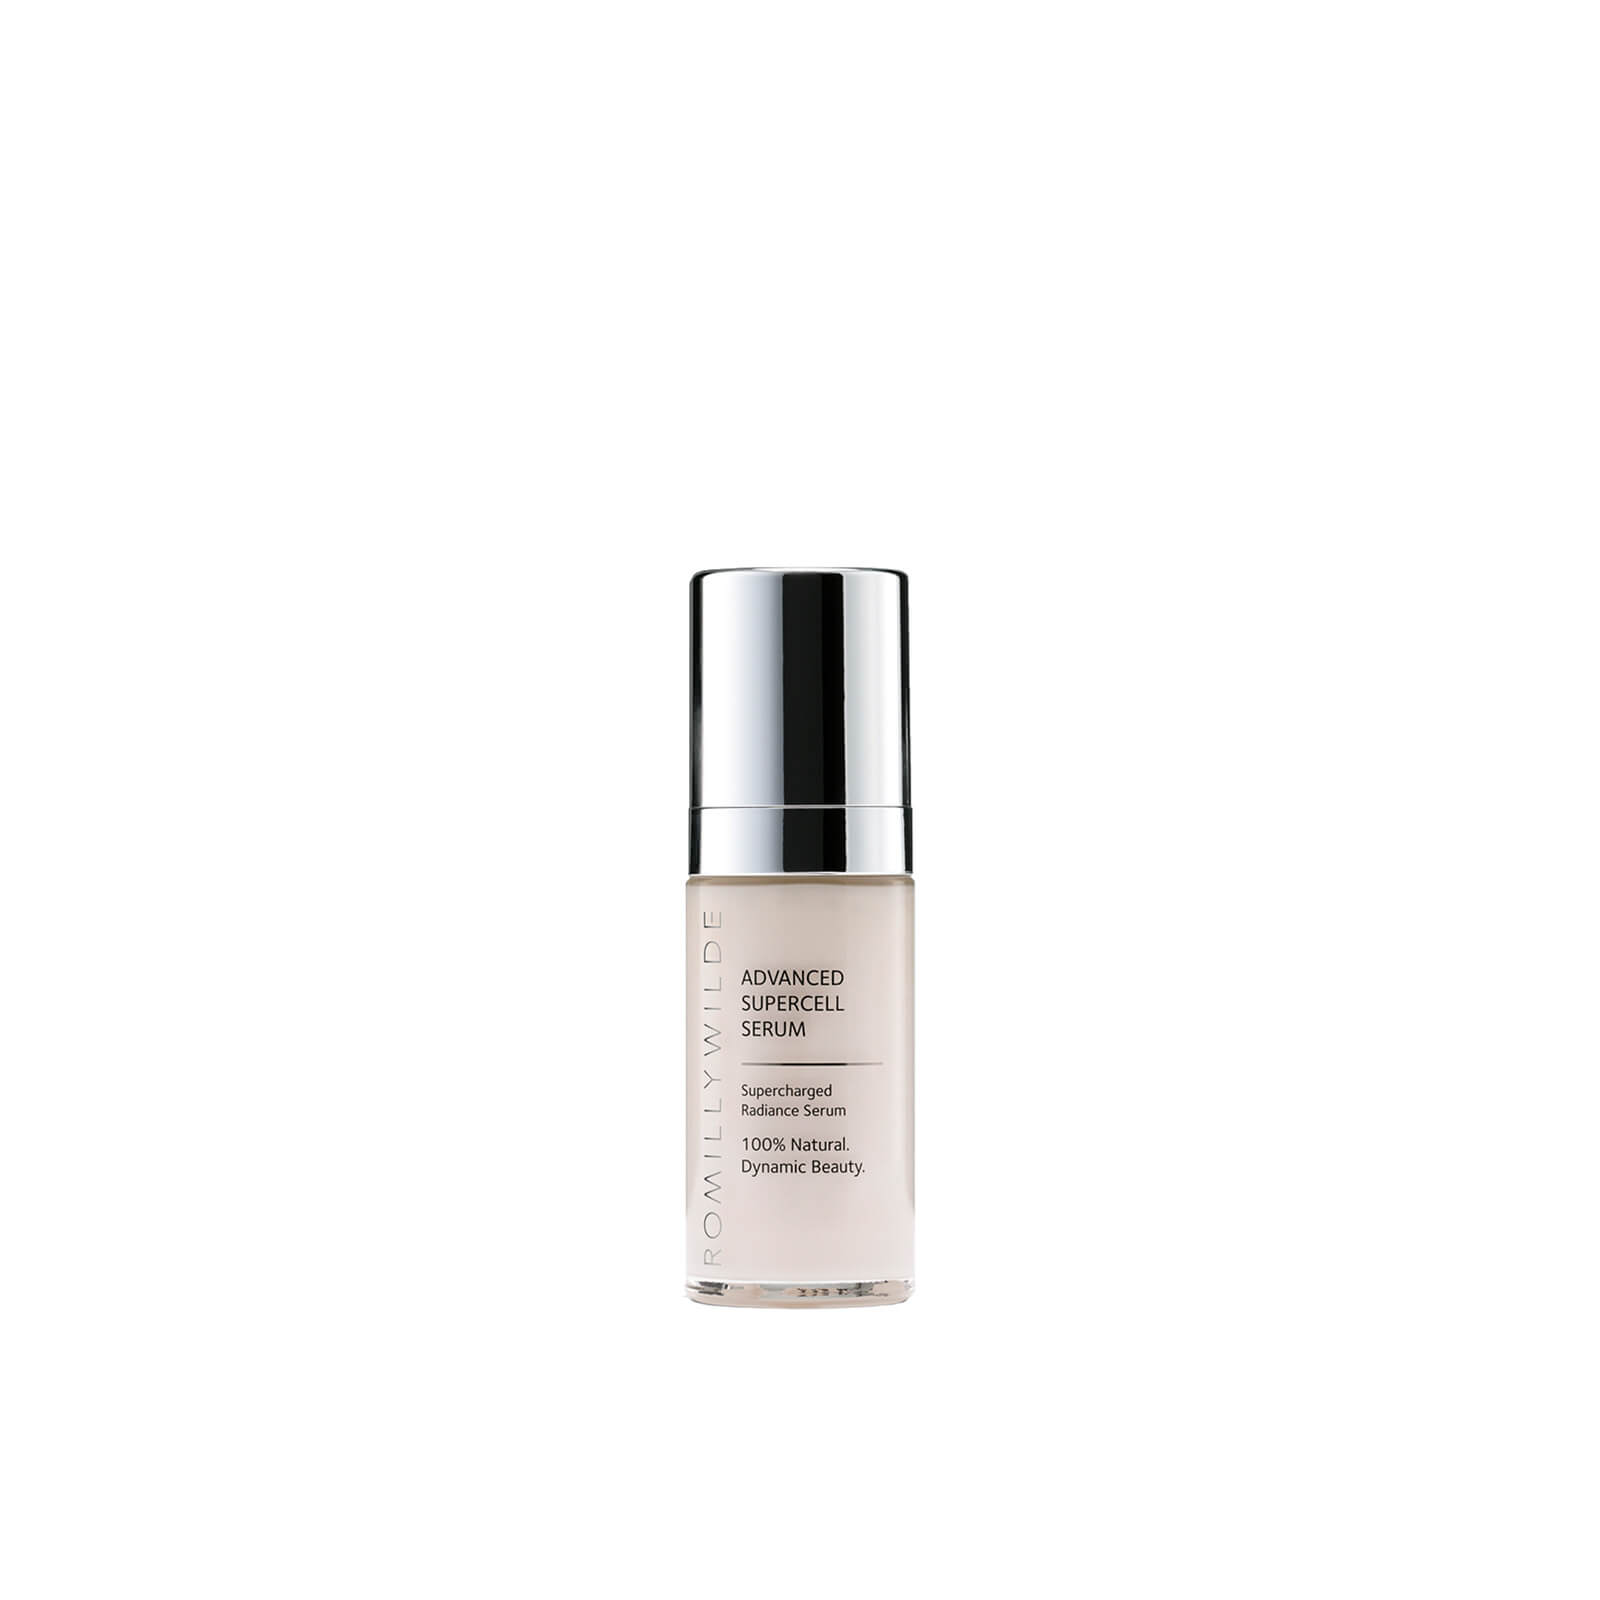 Image of Romilly Wilde Advanced Supercell Serum